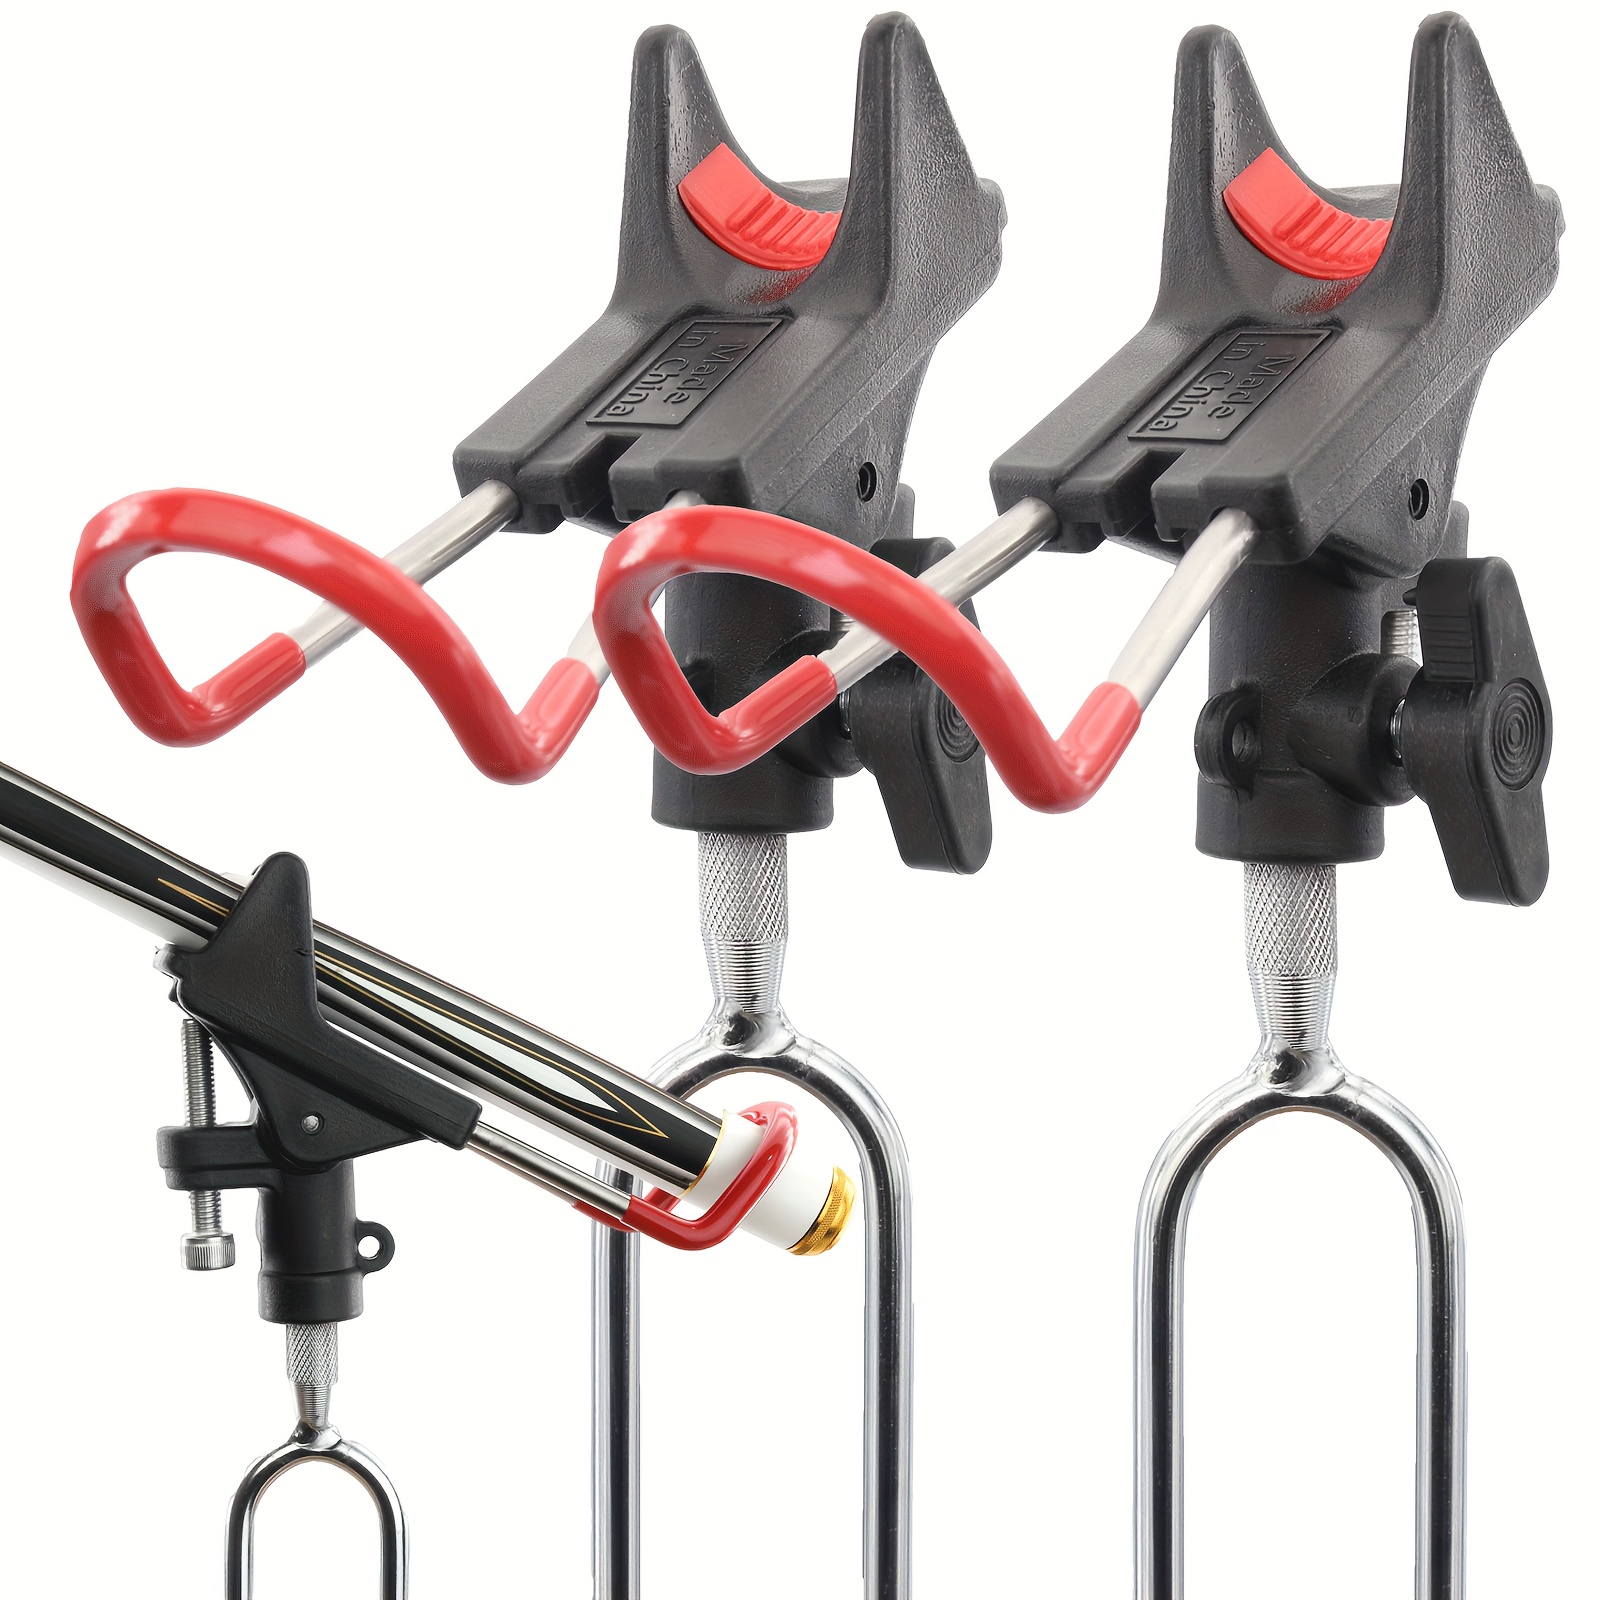 360° Adjustable Fishing Rod Holders: Perfect For Sea Fishing & Sub Fishing  - Outdoor Fishing Equipment